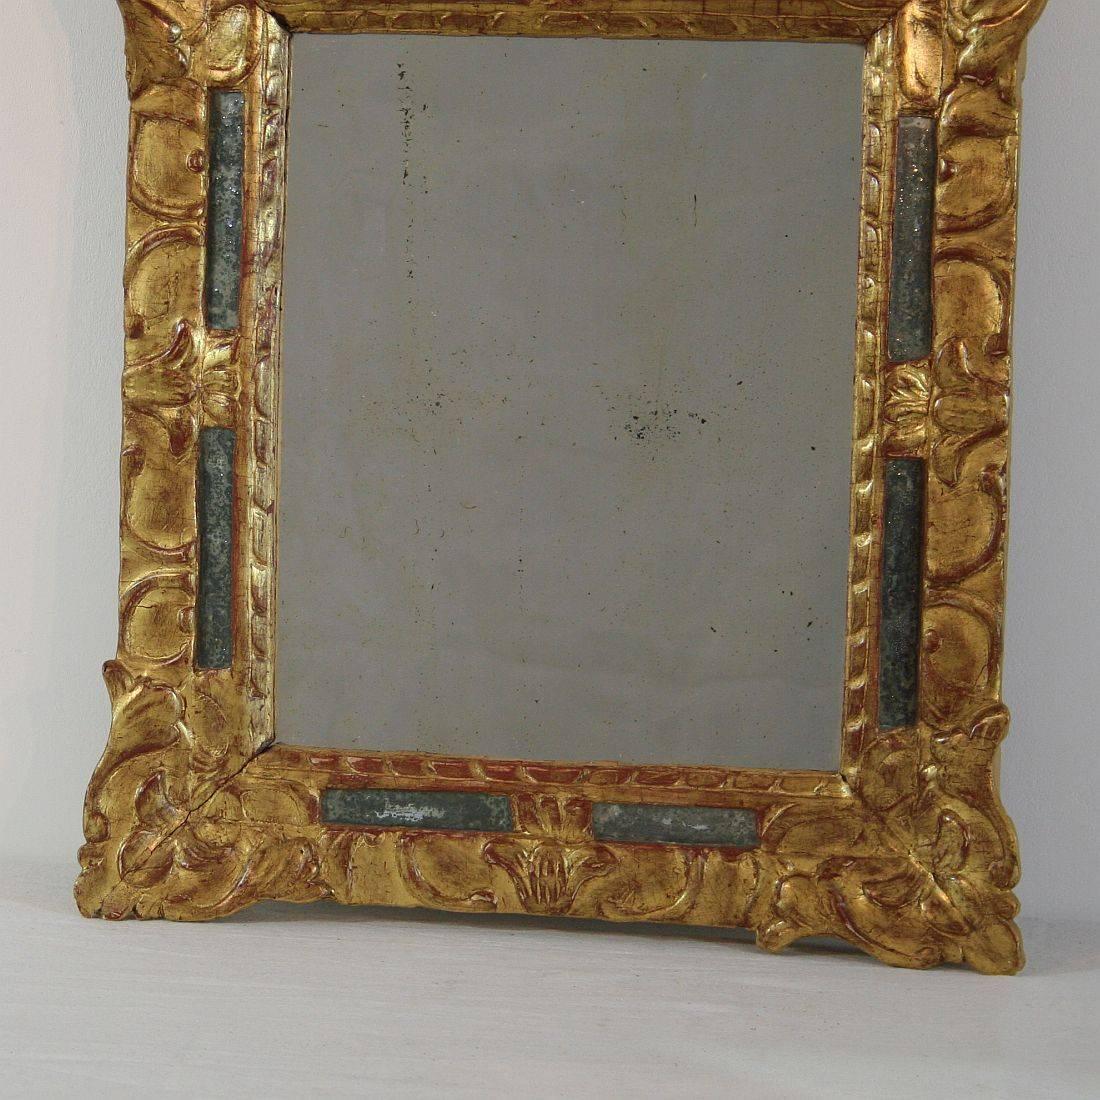 Carved Small Early 18th Century French Louis XIV Baroque Giltwood Mirror